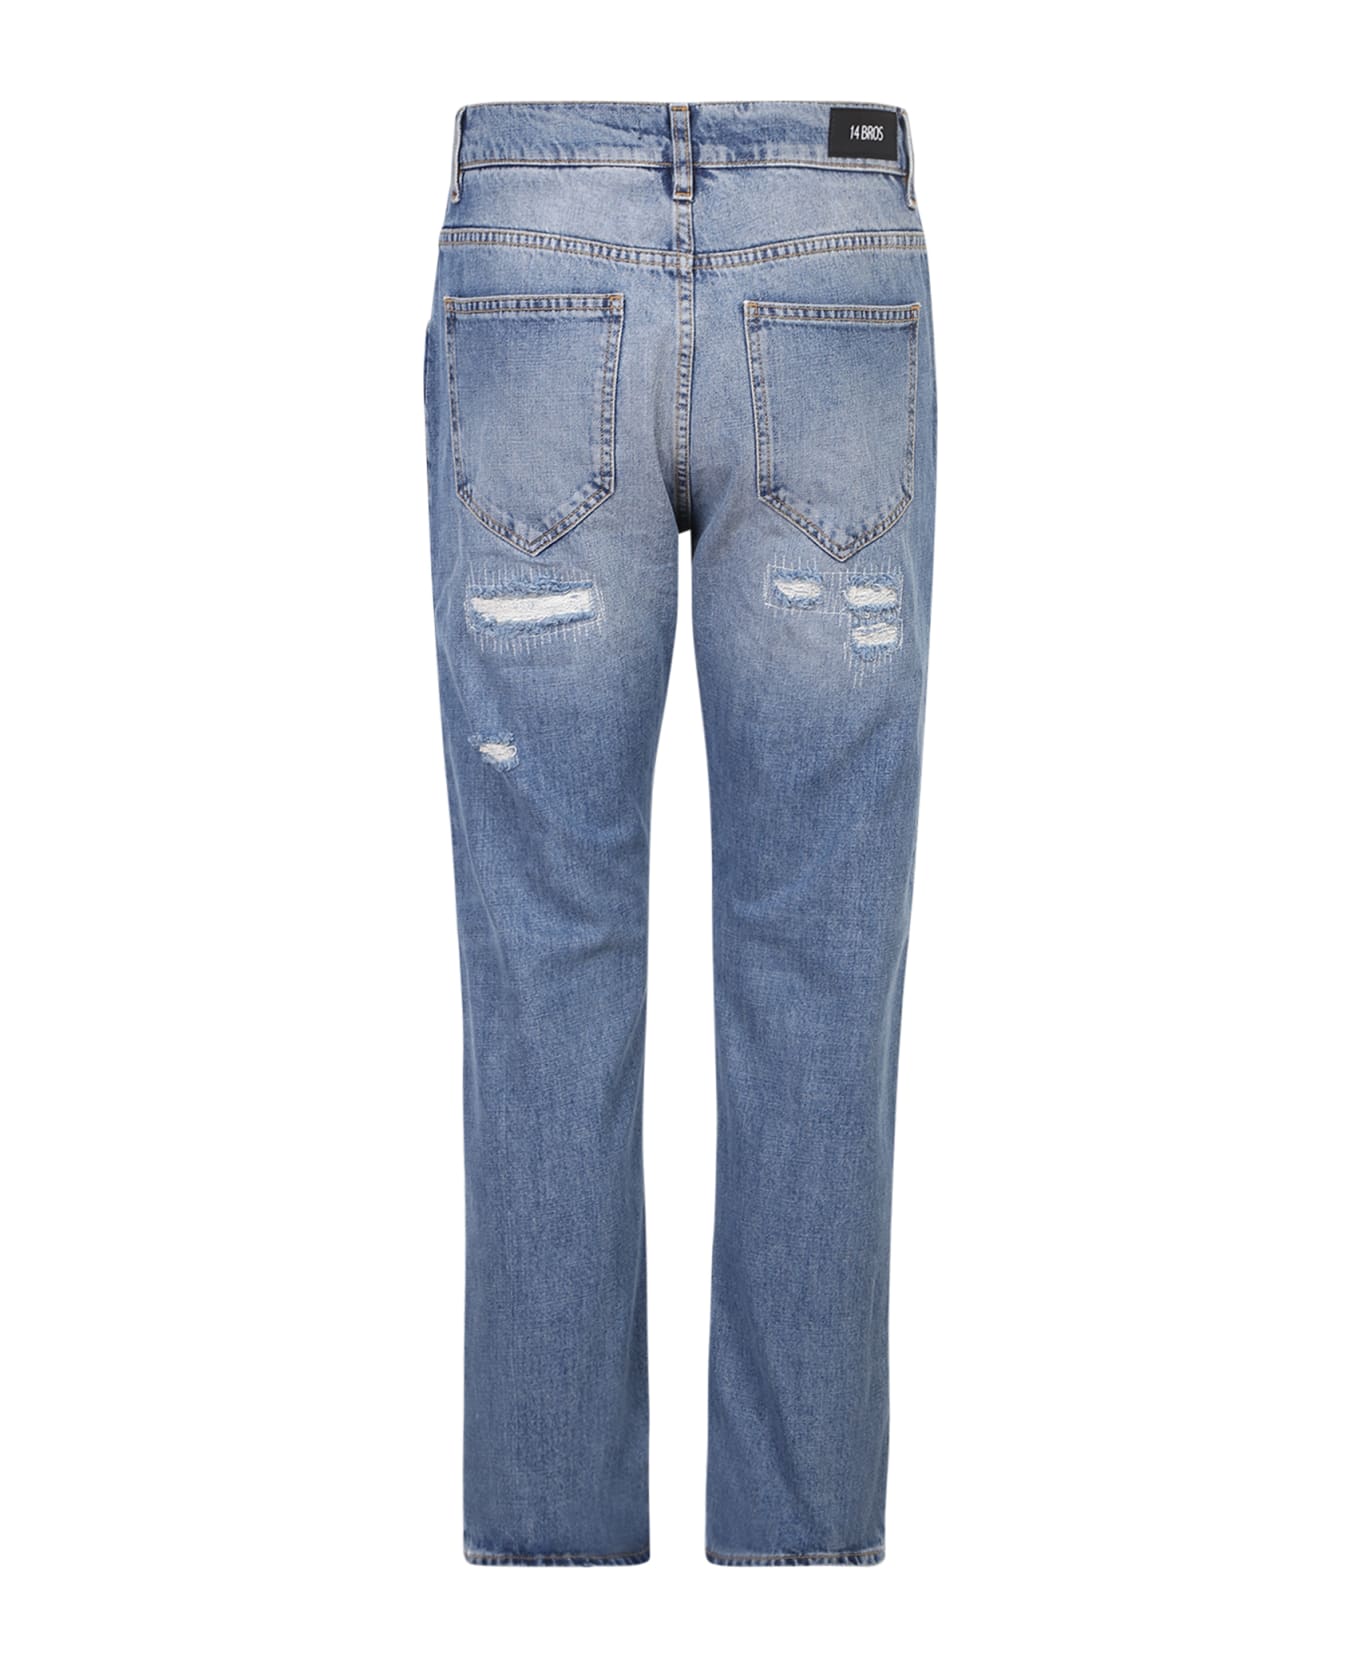 14 Bros Ripped Effect Jeans - Blue